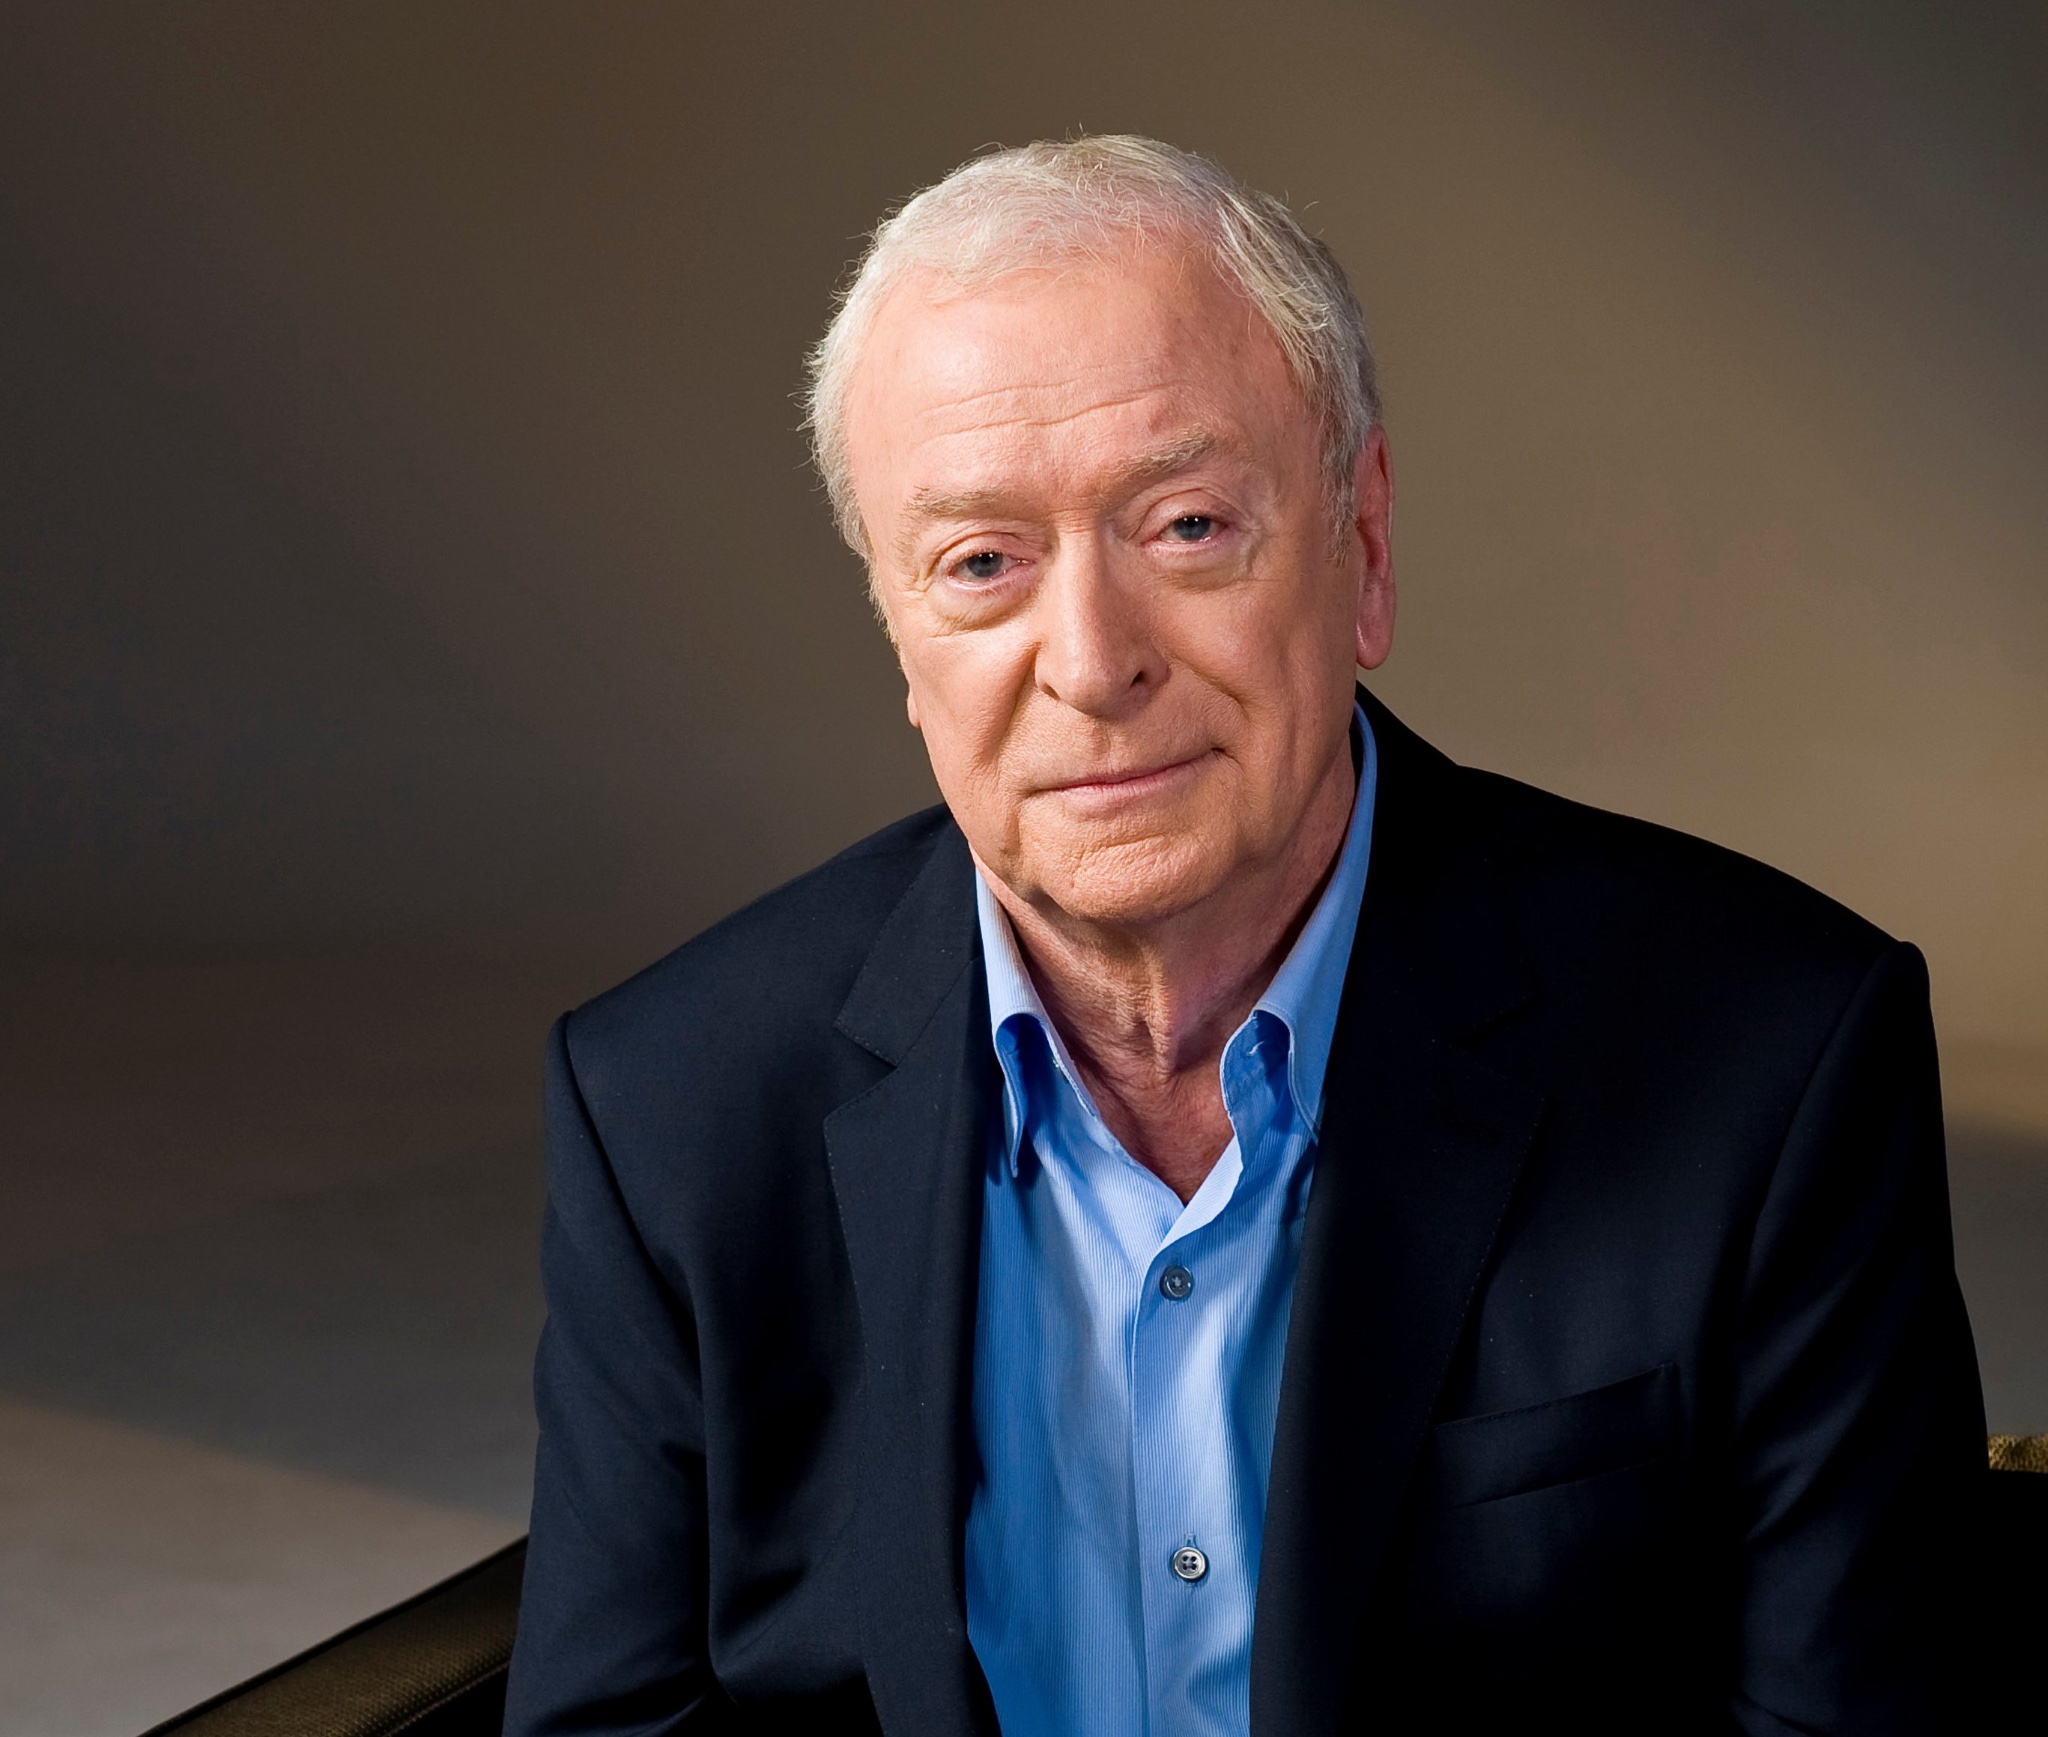 Happy 90th birthday to Sir Michael Caine, an absolute legend. 